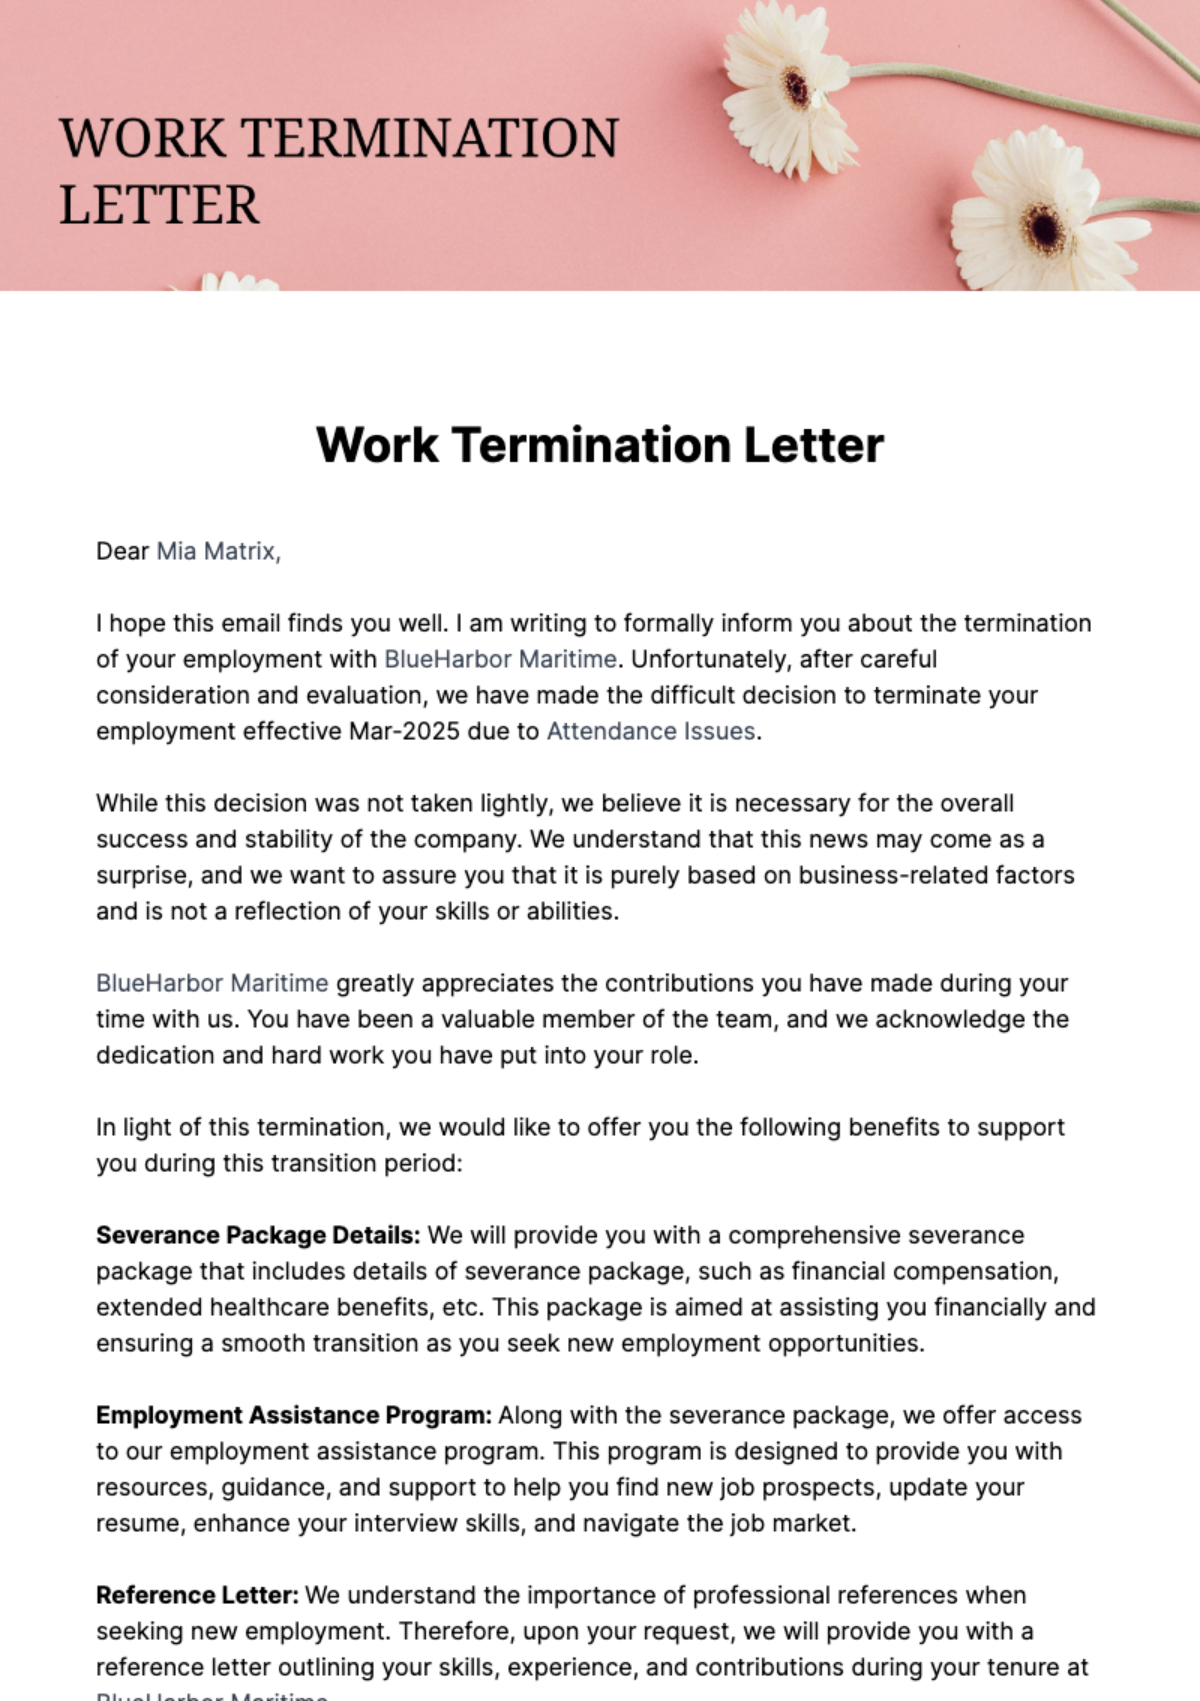 Free Work Termination Letter Template